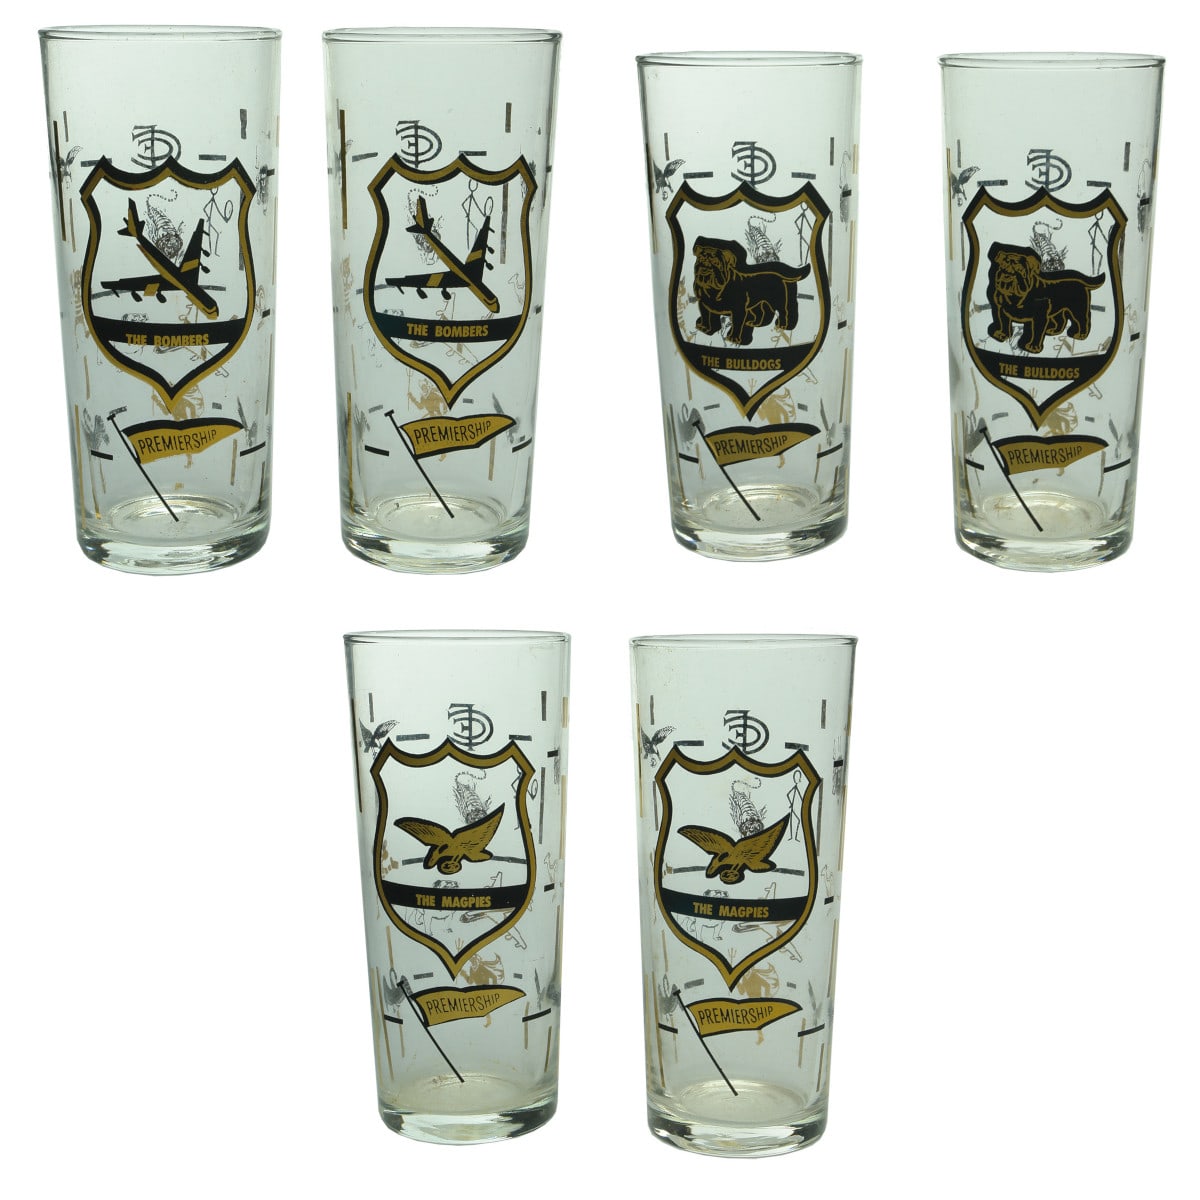 Six decorated glasses. 2 x The Bombers. Essendon Football Club. 2 x The Magpies. Collingwood Football Club. 2 x The Bulldogs. Footscray Football Club. Premiership. Other VFL Logos on backs. (Victoria)